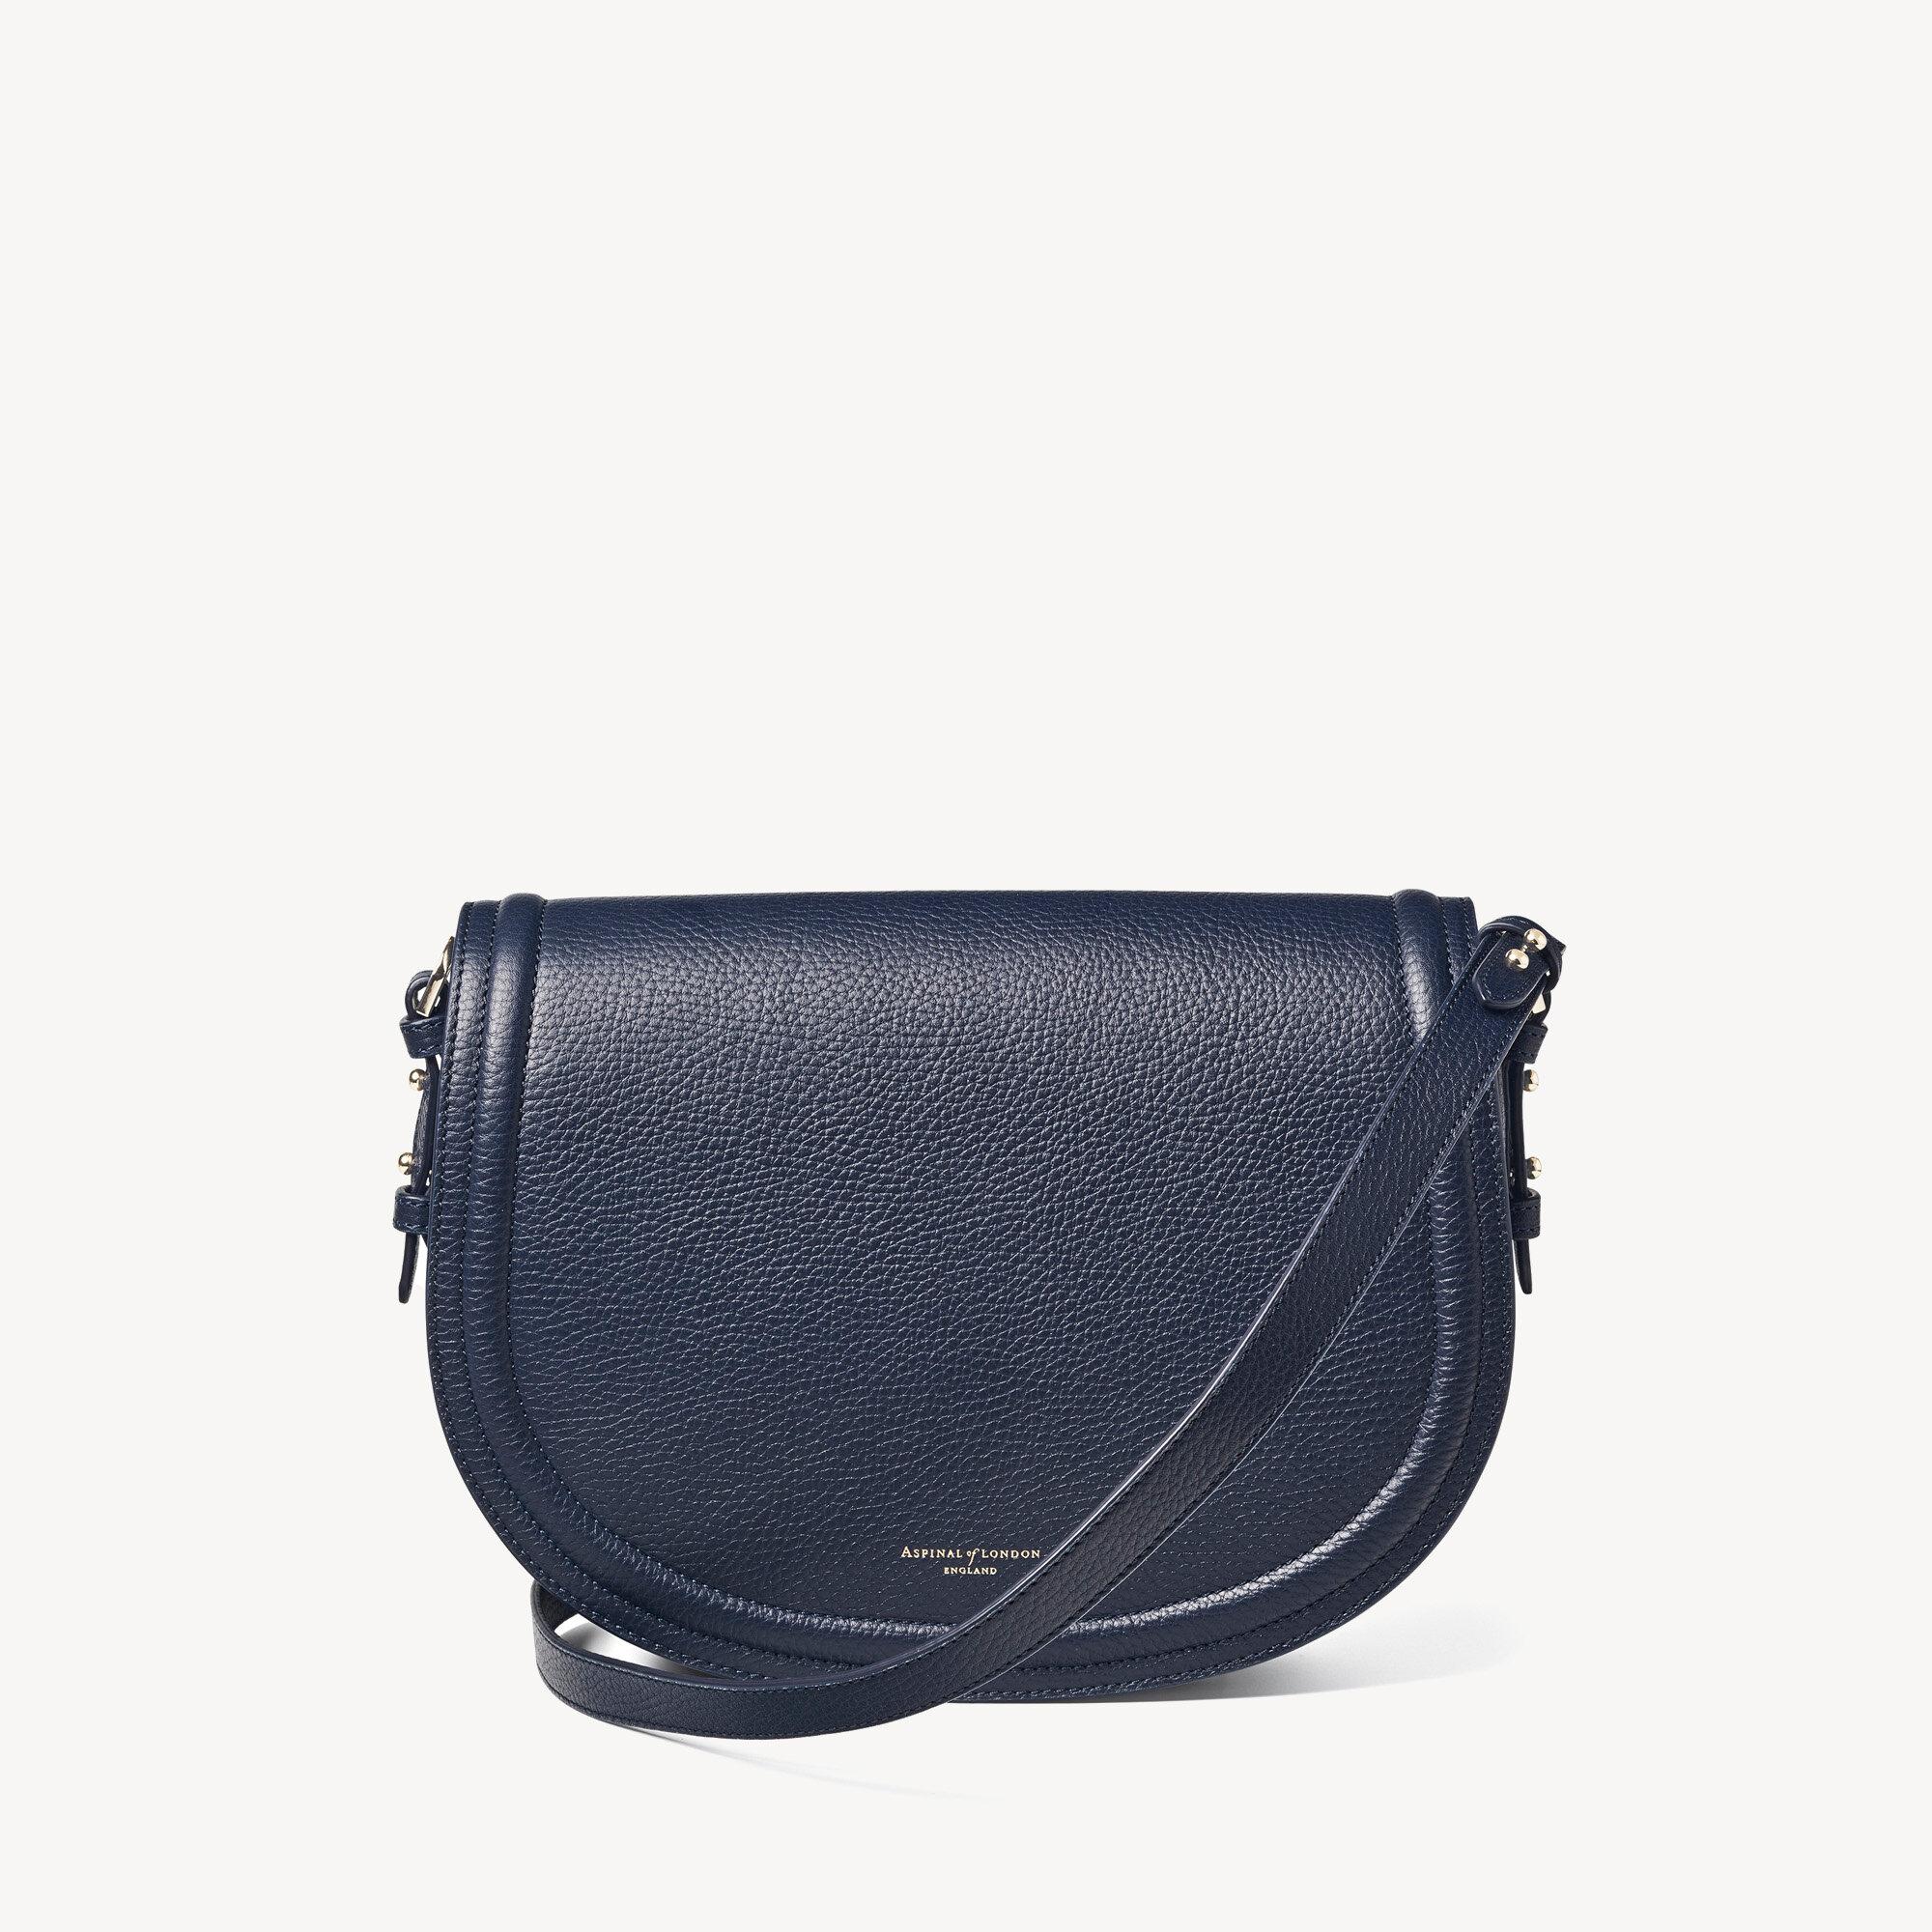 Aspinal of London Pebble Leather Stella Satchel in Blue | Lyst